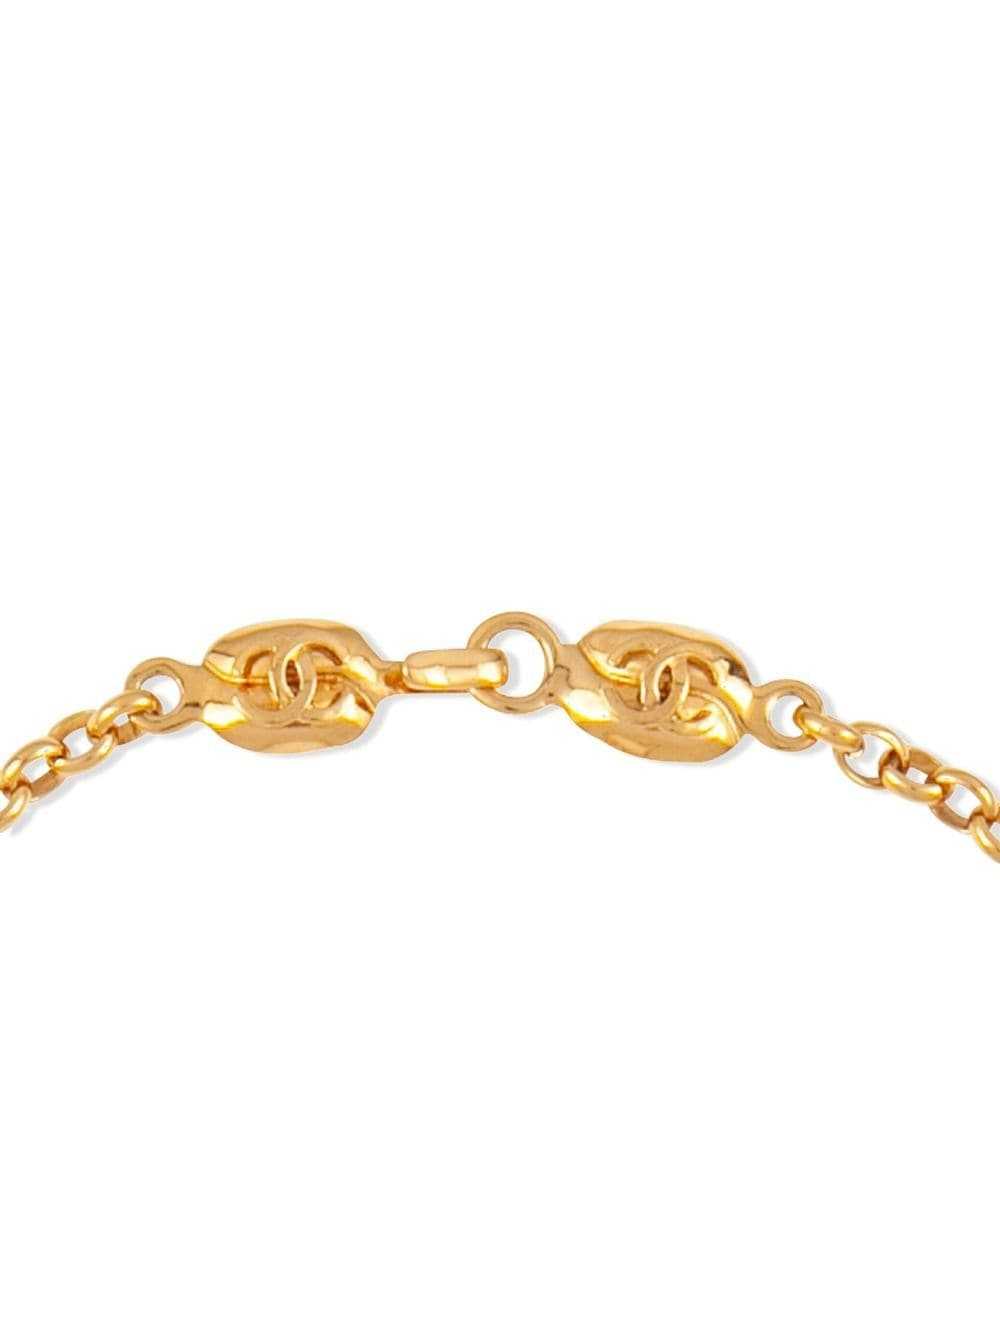 CHANEL Pre-Owned 1997 CC pendant necklace - Gold - image 3